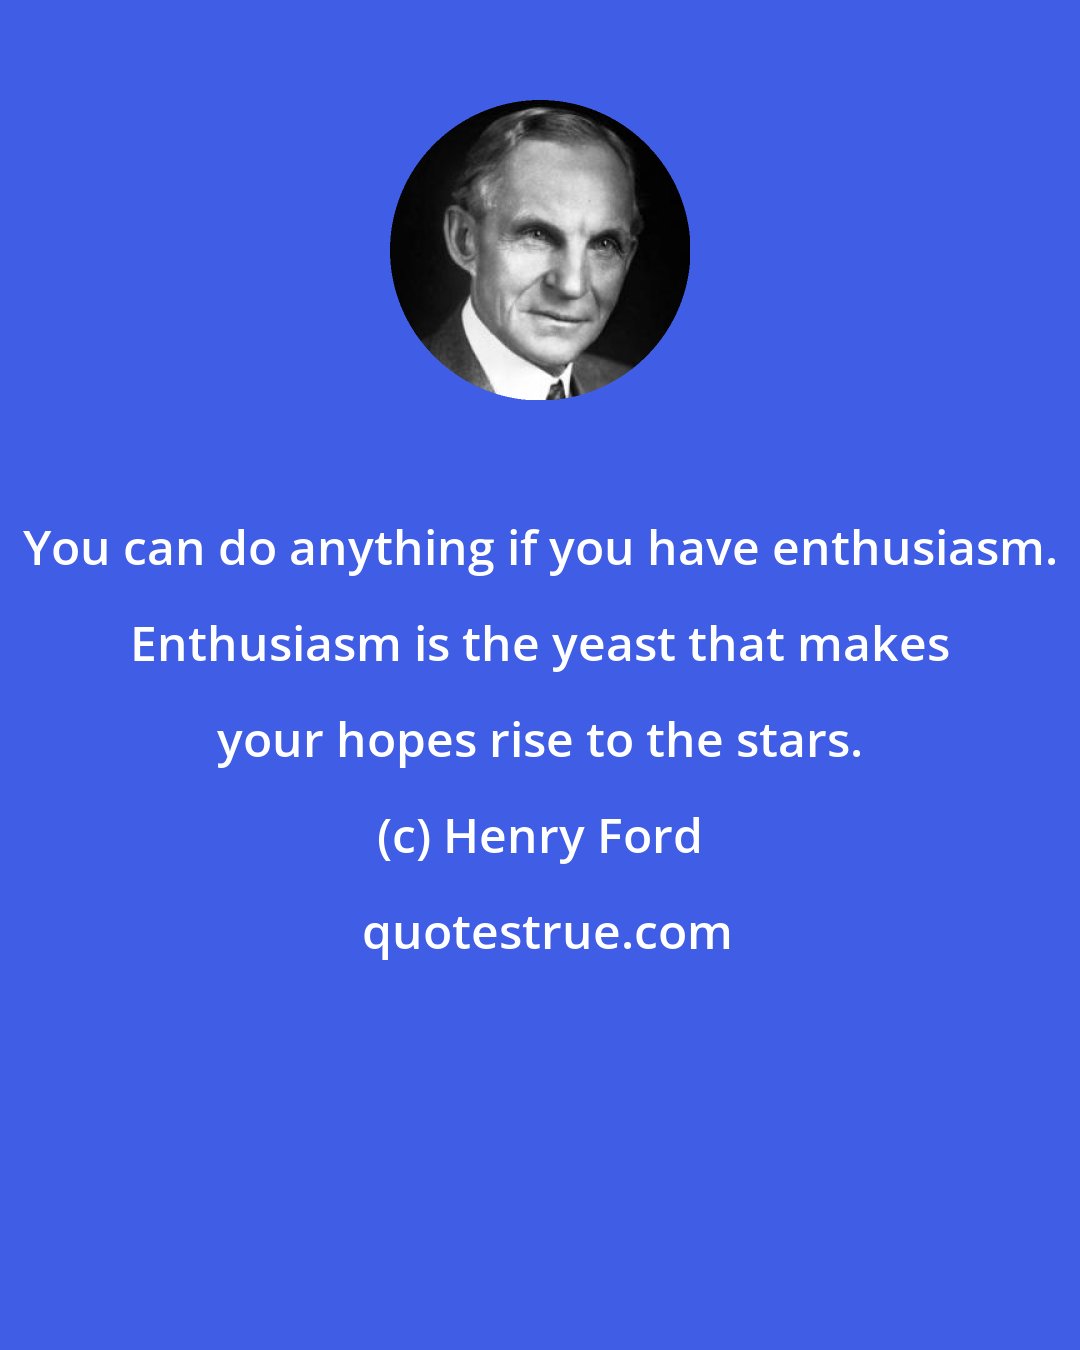 Henry Ford: You can do anything if you have enthusiasm. Enthusiasm is the yeast that makes your hopes rise to the stars.